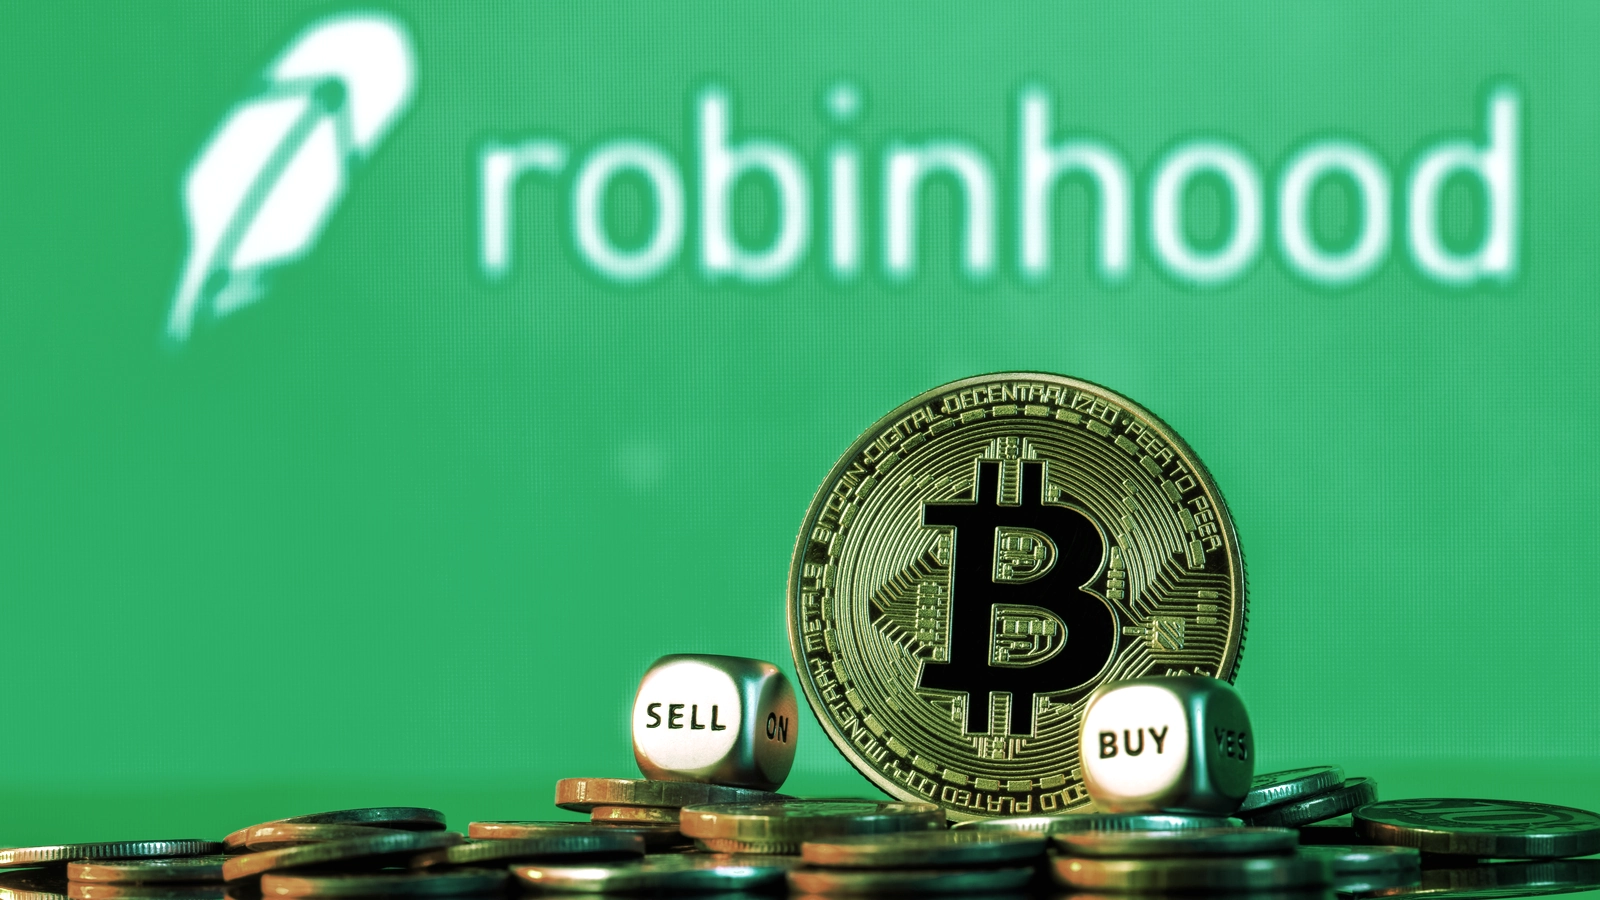 Robinhood Announces Cryptocurrency Trading